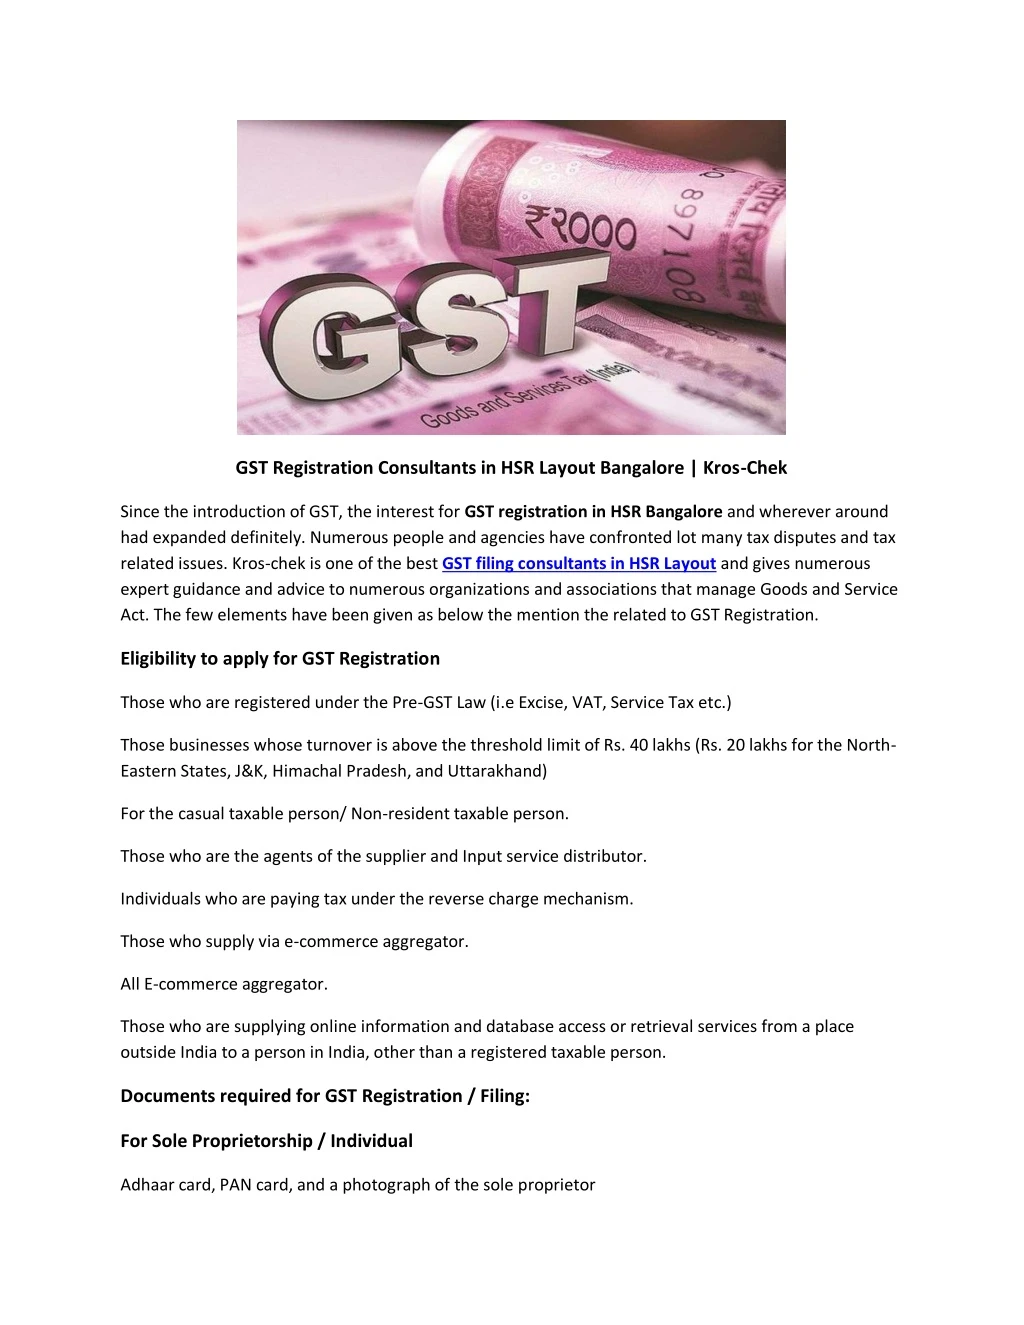 gst registration consultants in hsr layout